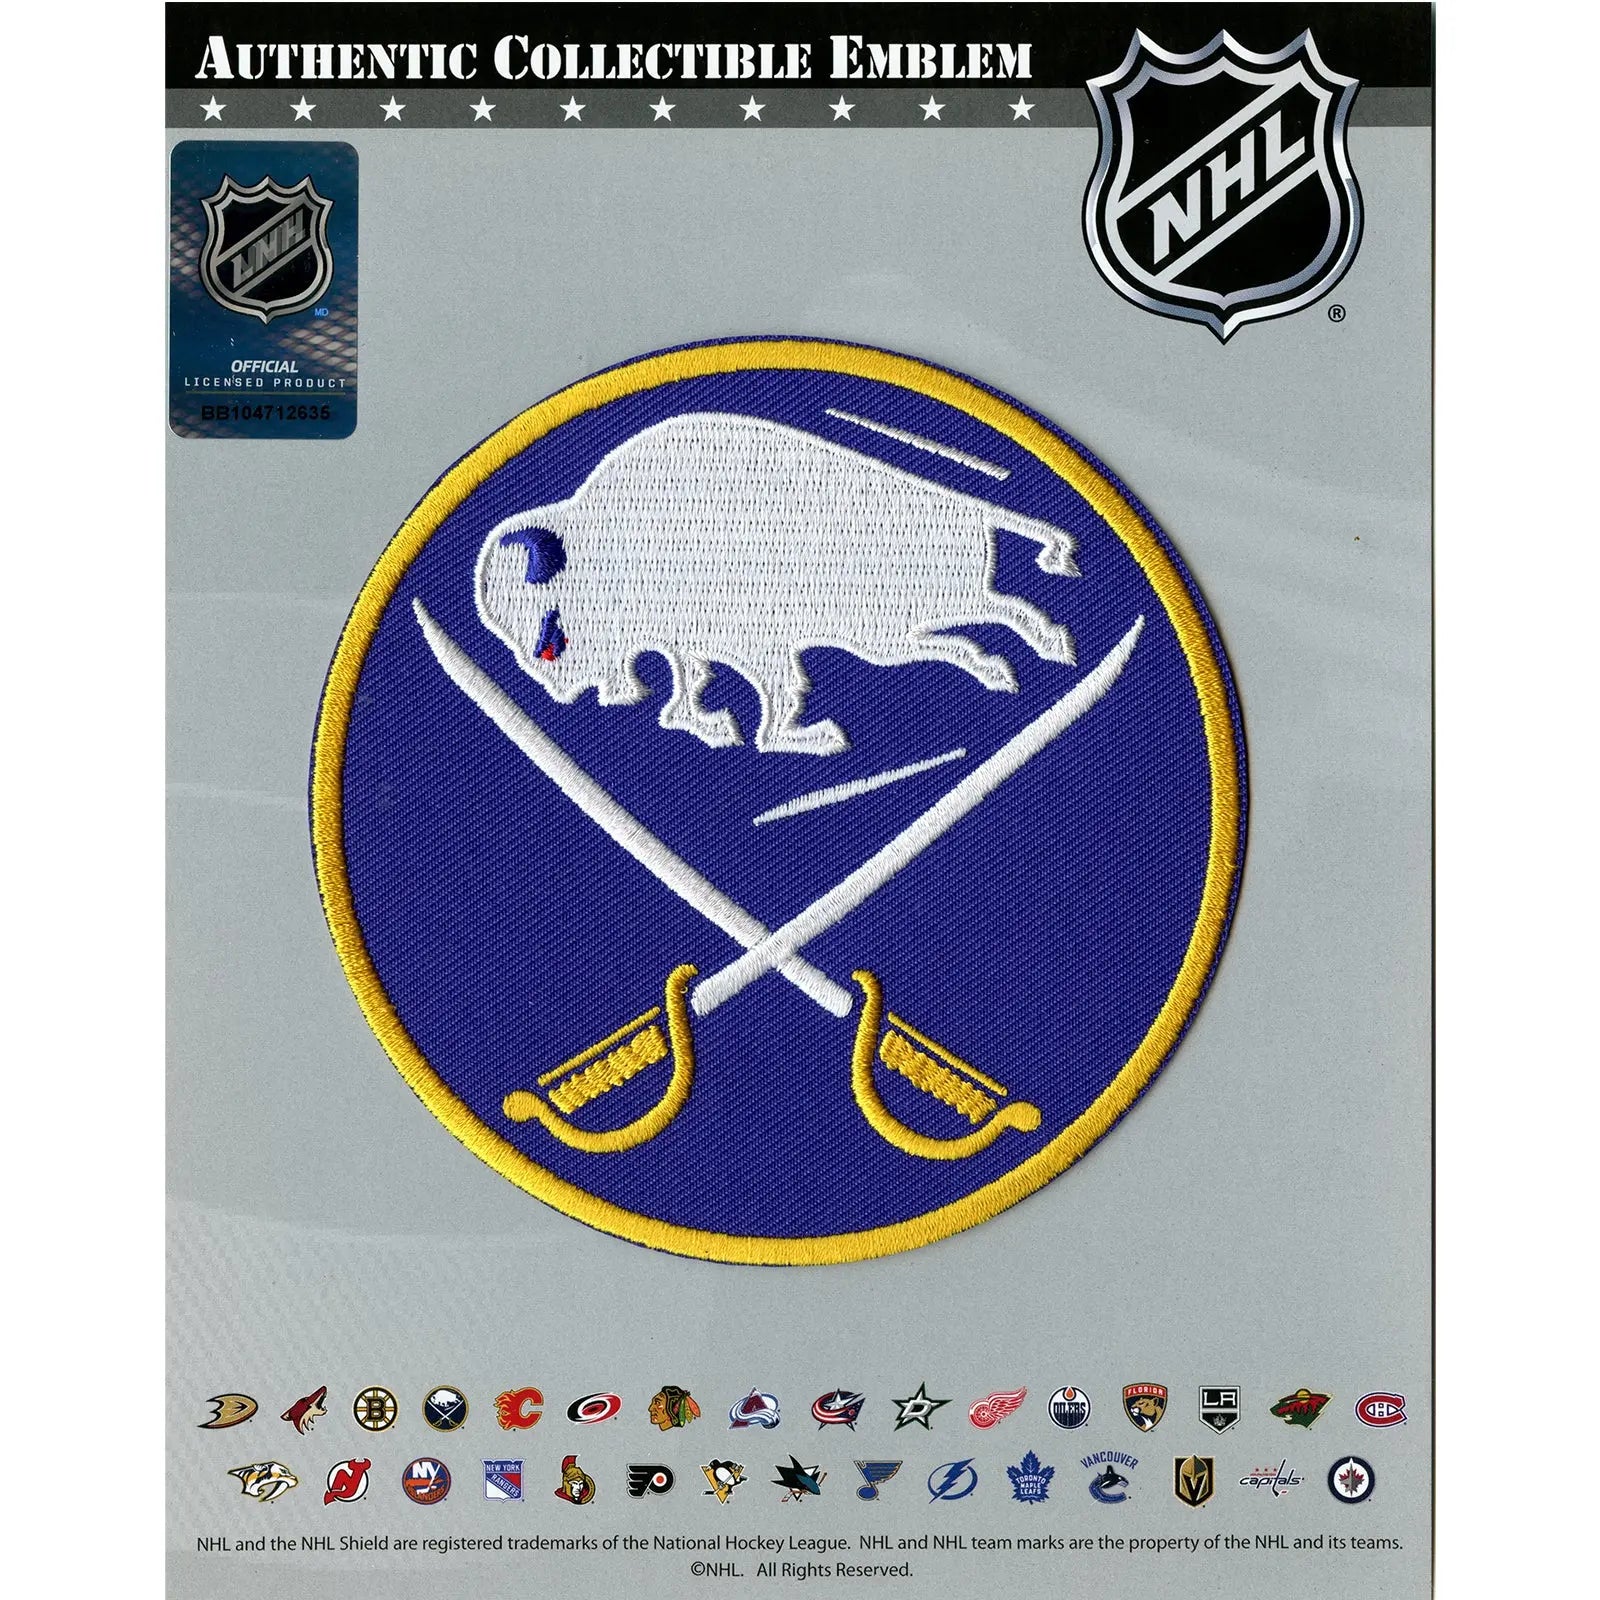 Buffalo Sabres Apparel, Officially Licensed